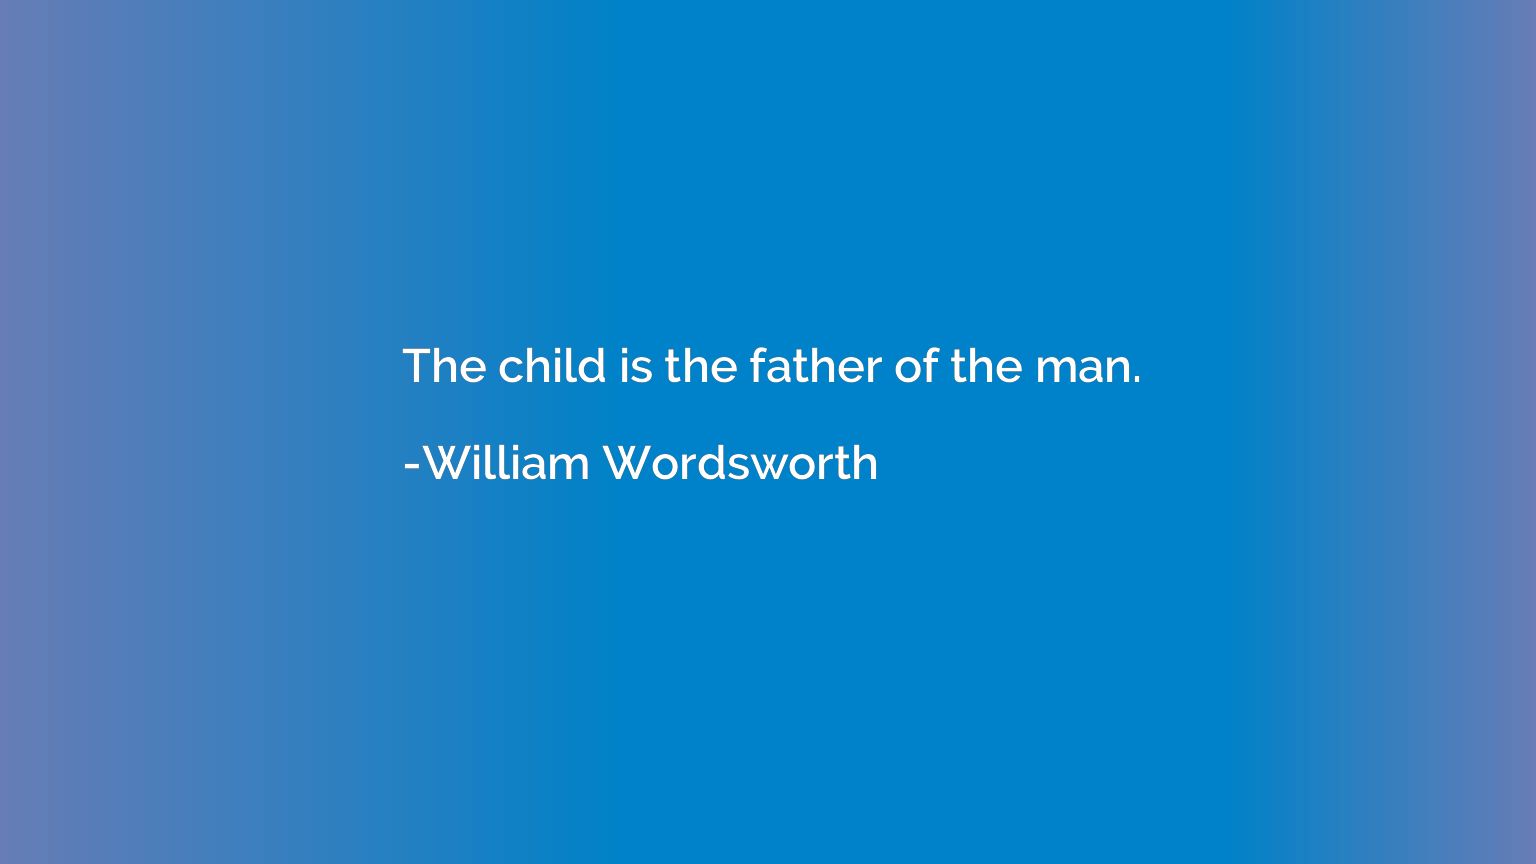 The child is the father of the man.